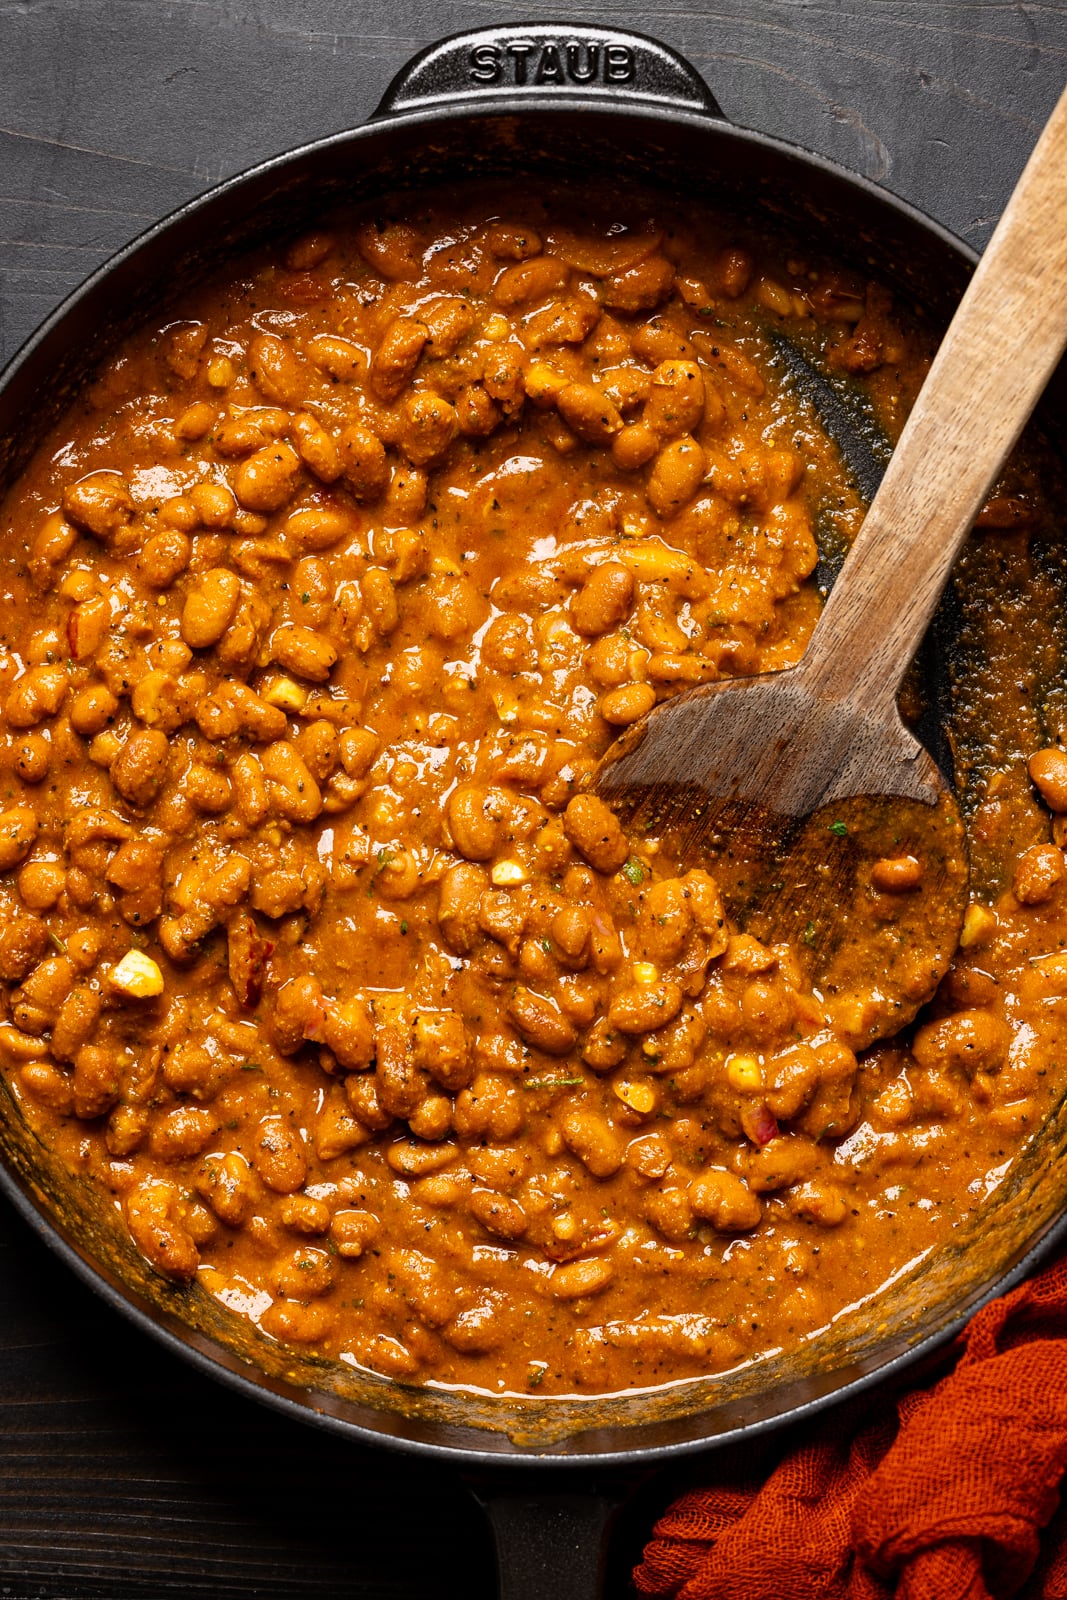 Cooked pinto beans in BBQ sauce in a deep black skillet and wooden spoon.